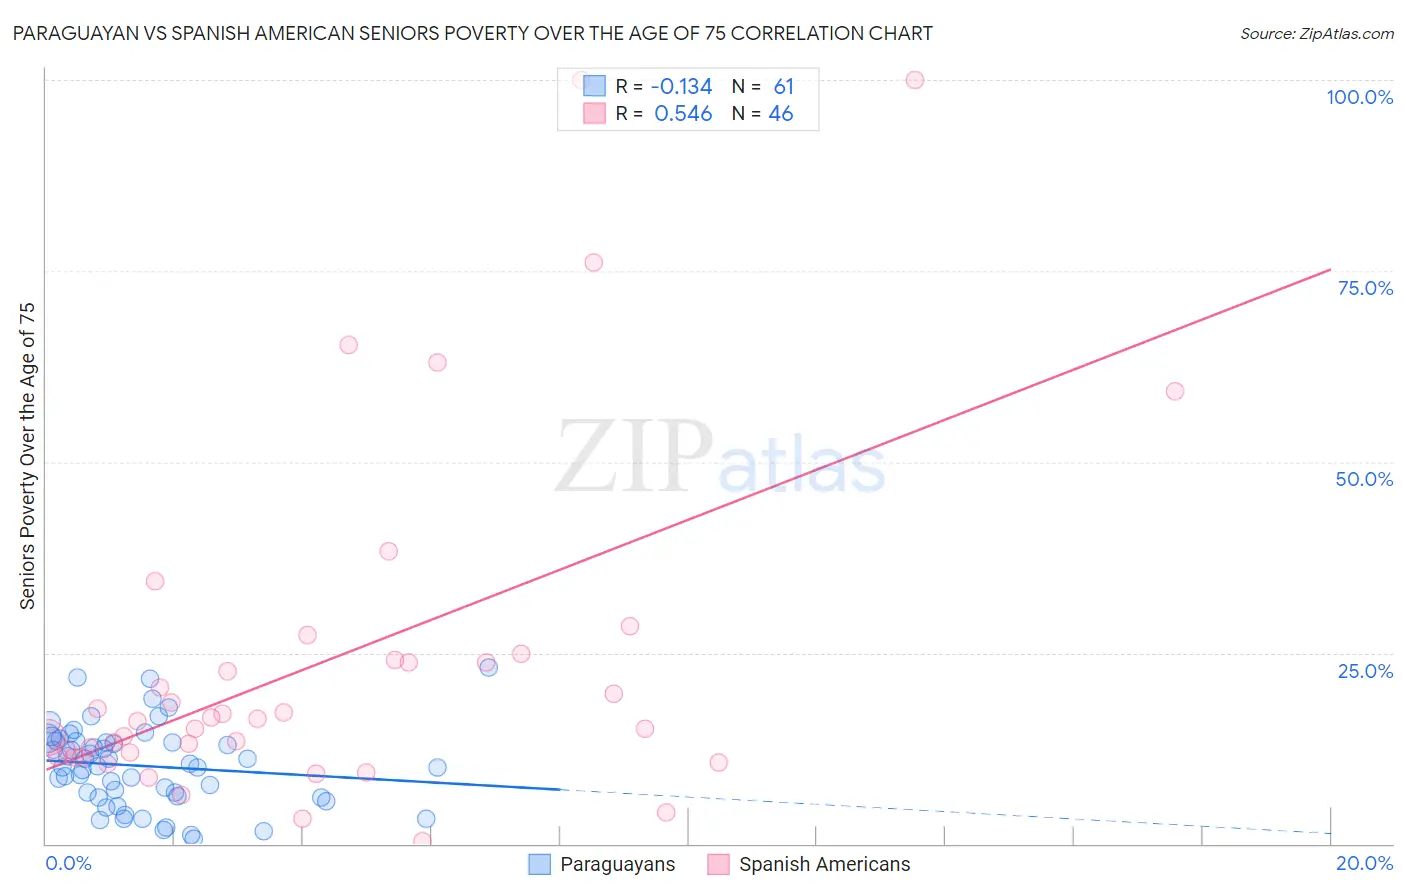 Paraguayan vs Spanish American Seniors Poverty Over the Age of 75